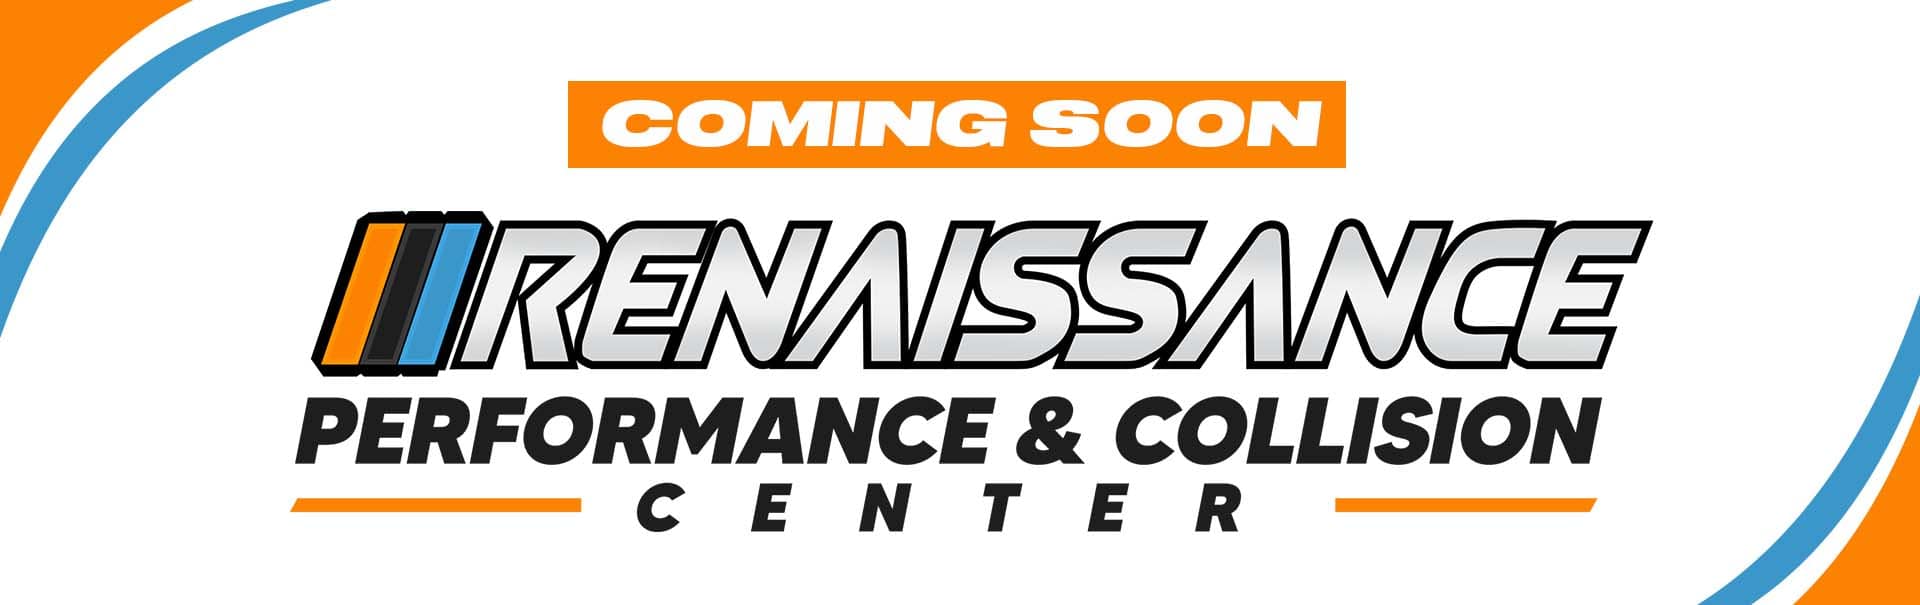 Renaissance Cars Performance and Collision Center - Near Me in North Carolina